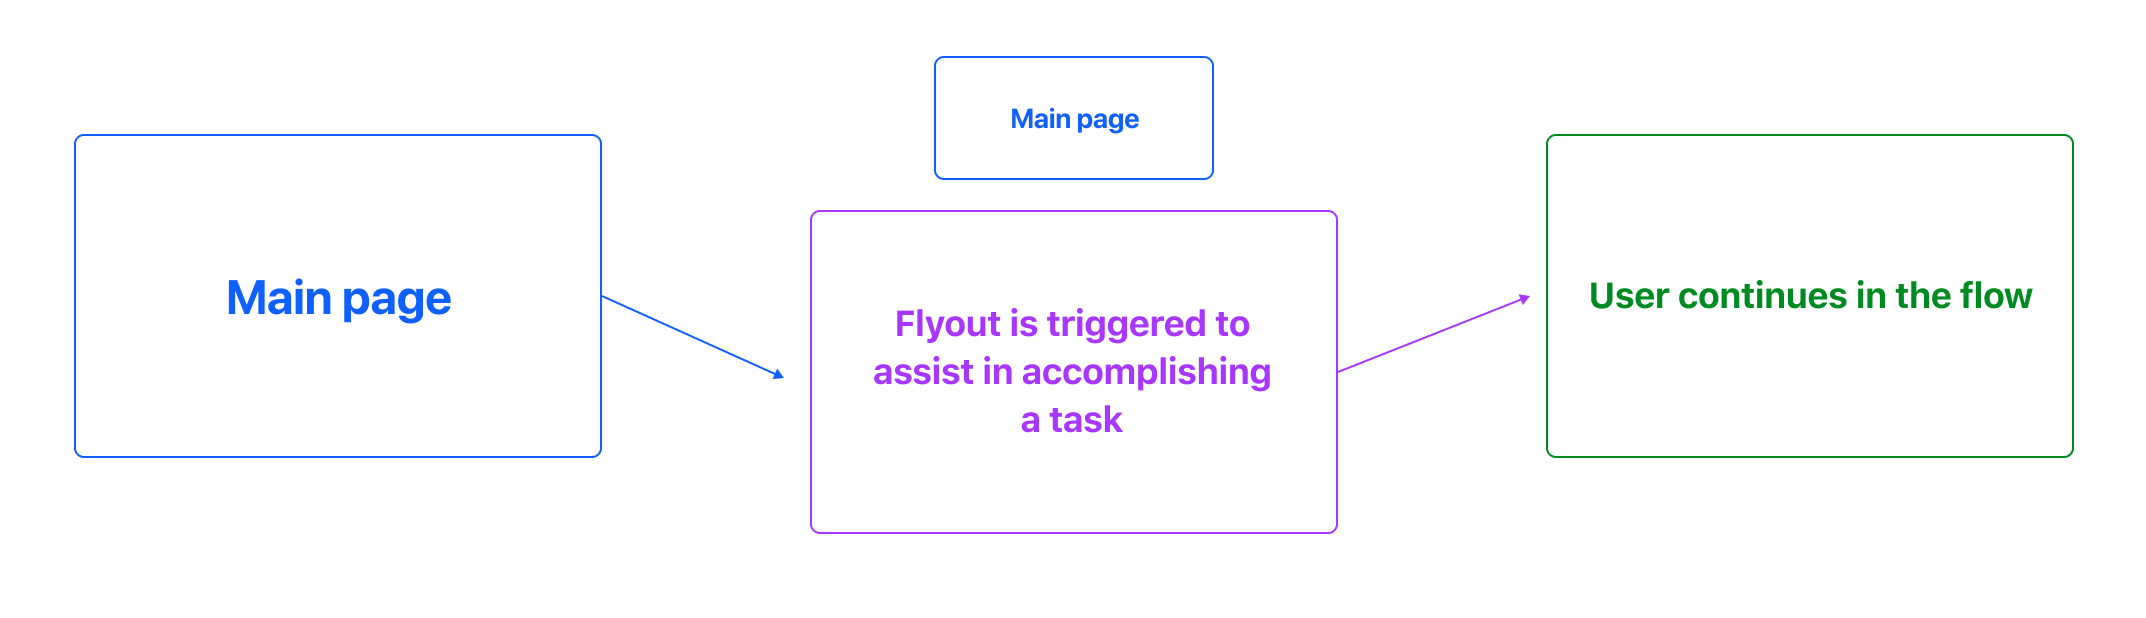 Flyout hierarchy in the user flow